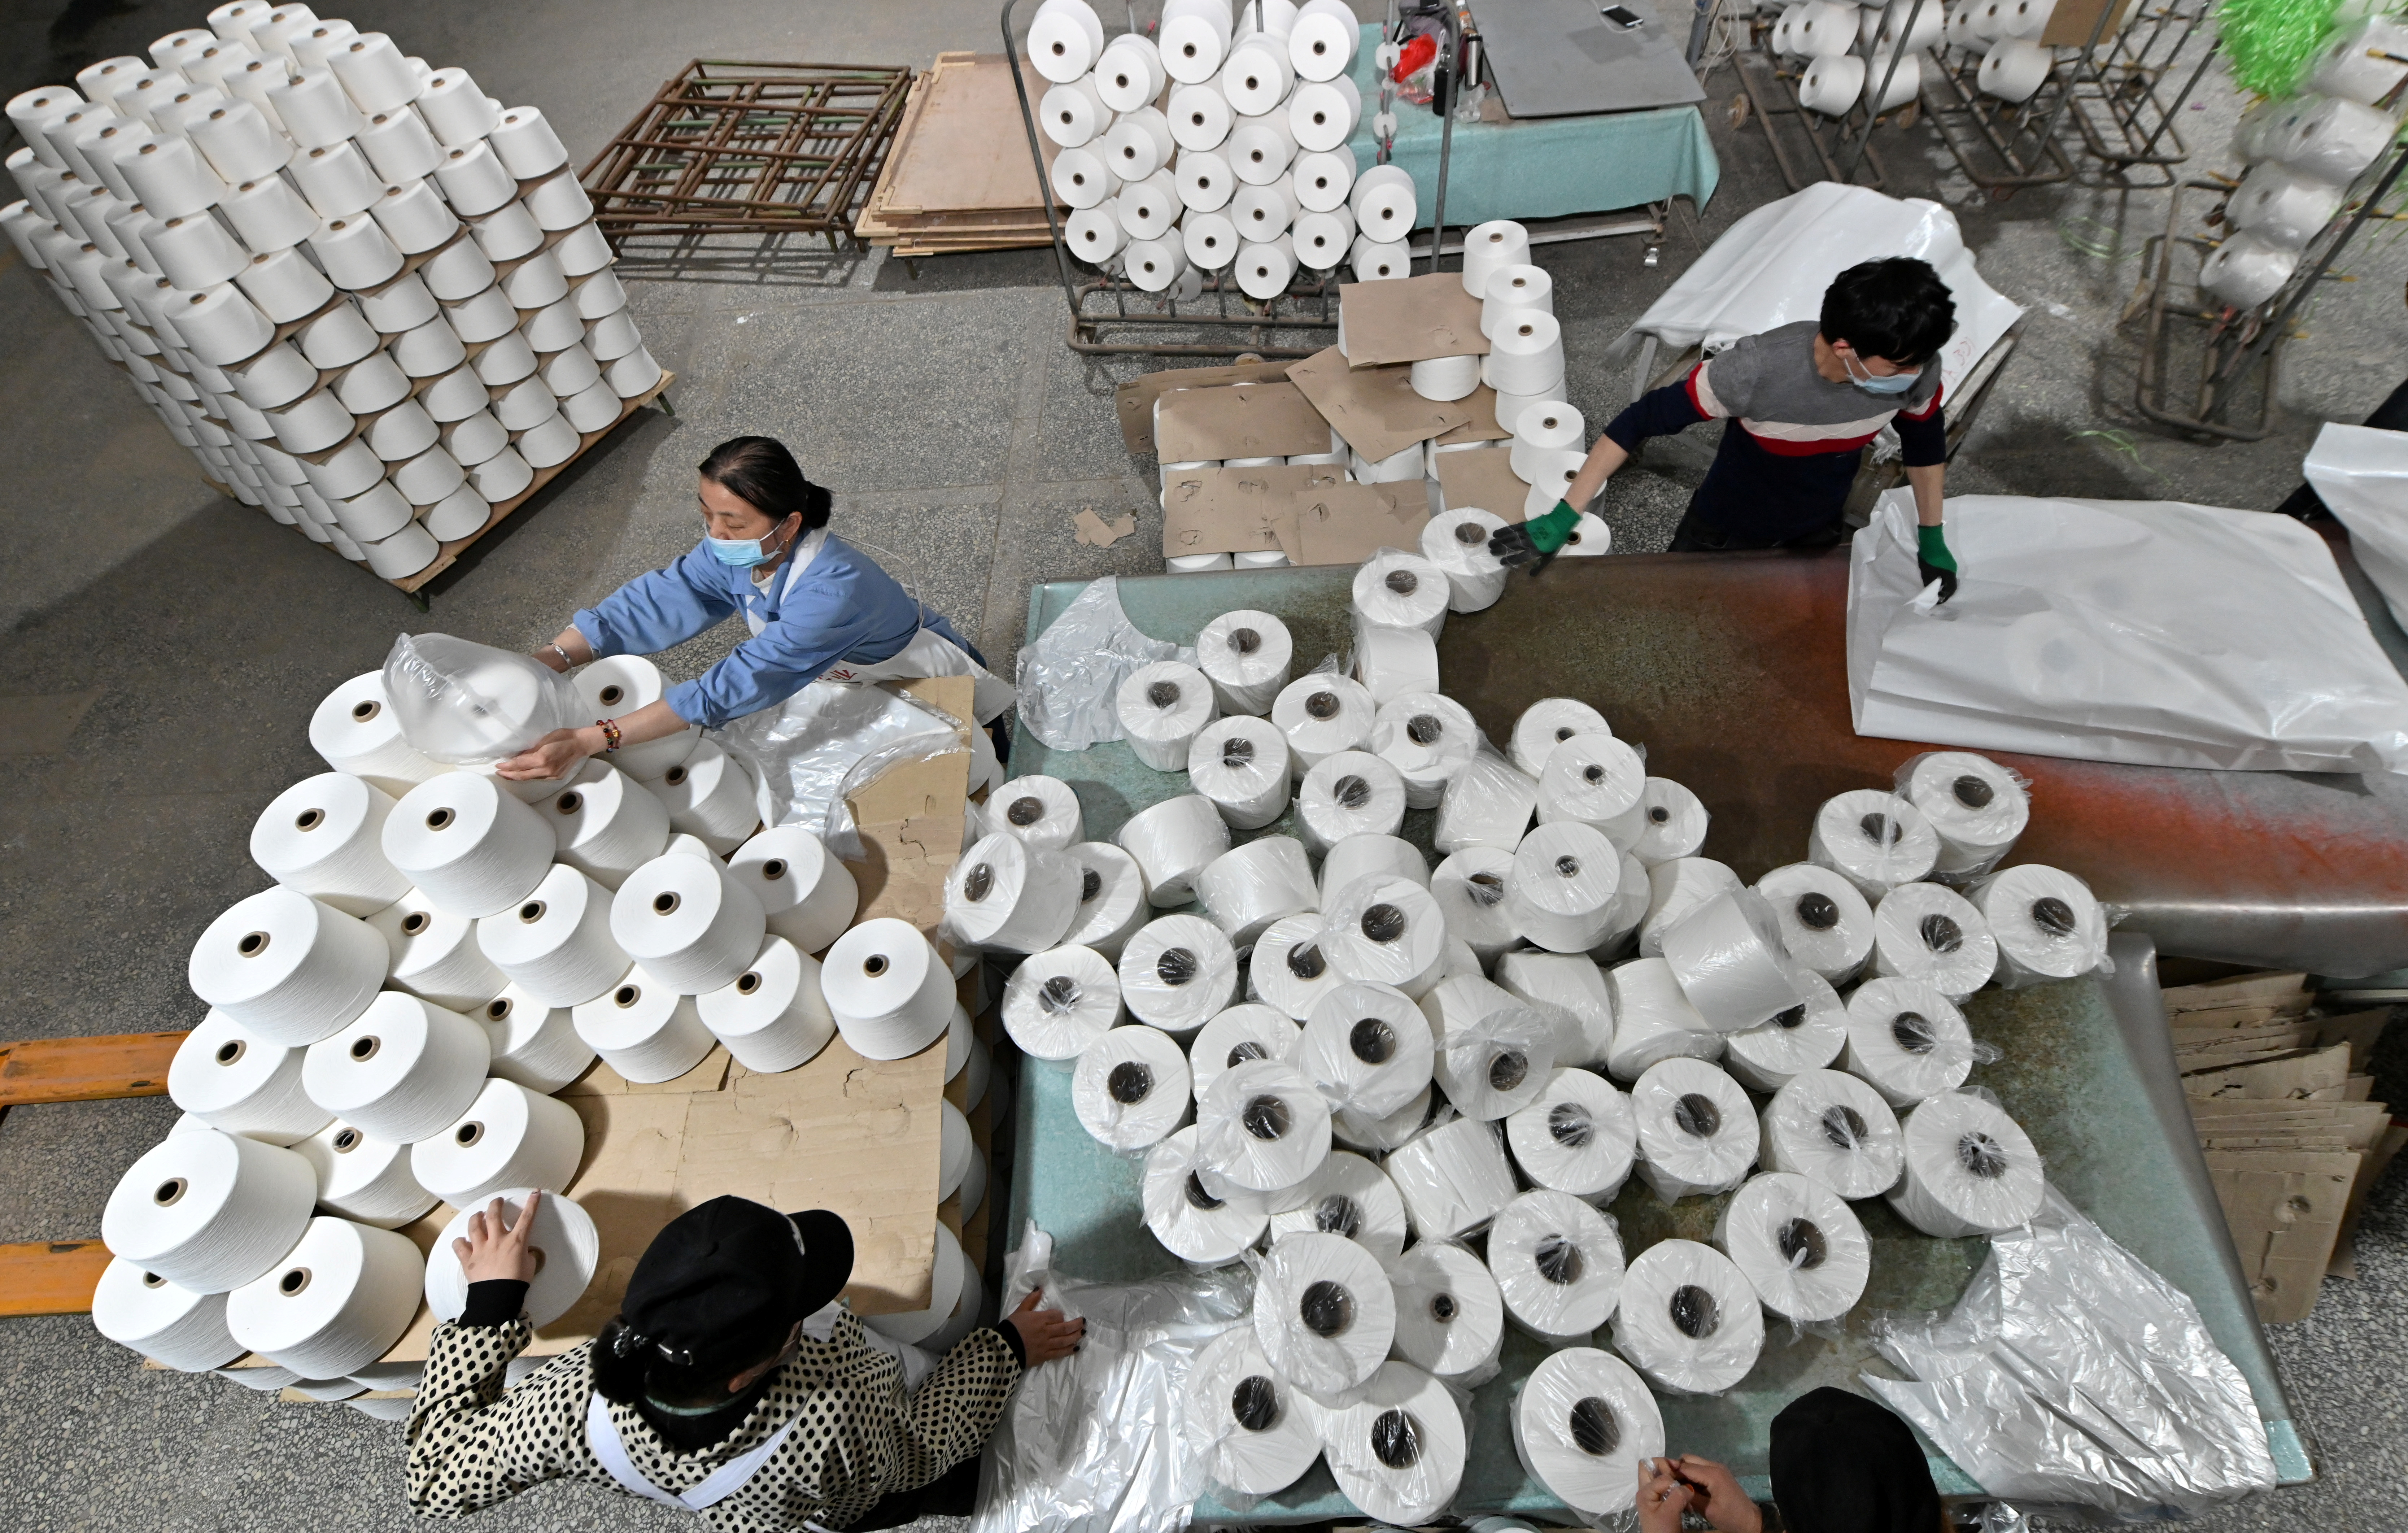 Workers are seen on the production line at a cotton textile factory in Korla